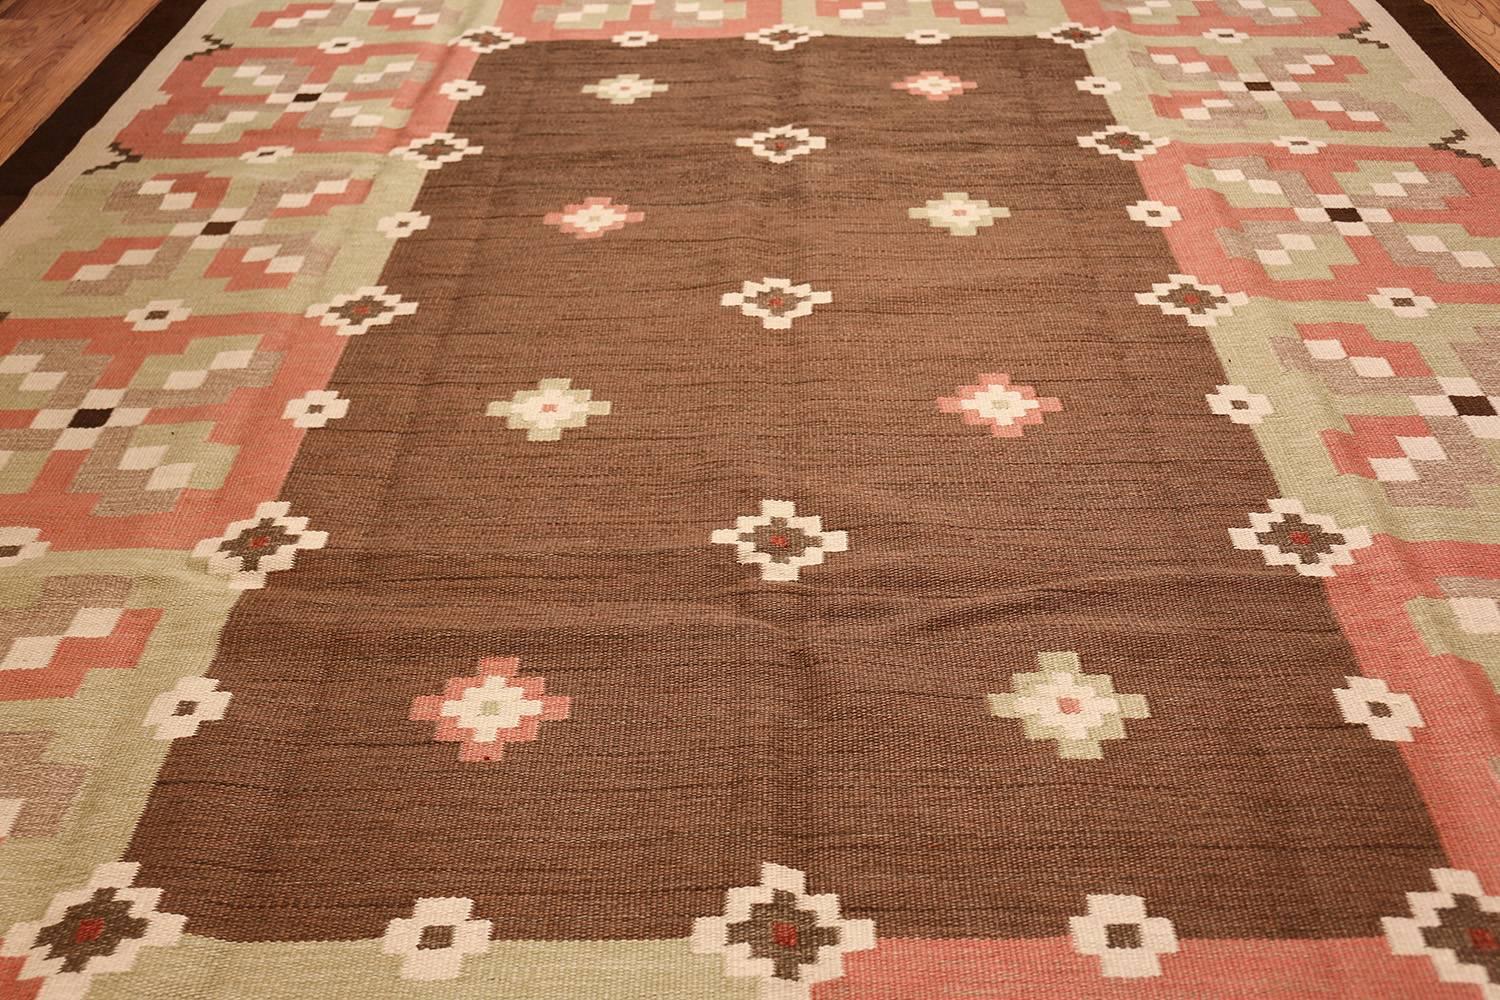 Hand-Woven Vintage Swedish Kilim. Size: 9 ft 9 in x 13 ft 4 in (2.97 m x 4.06 m)